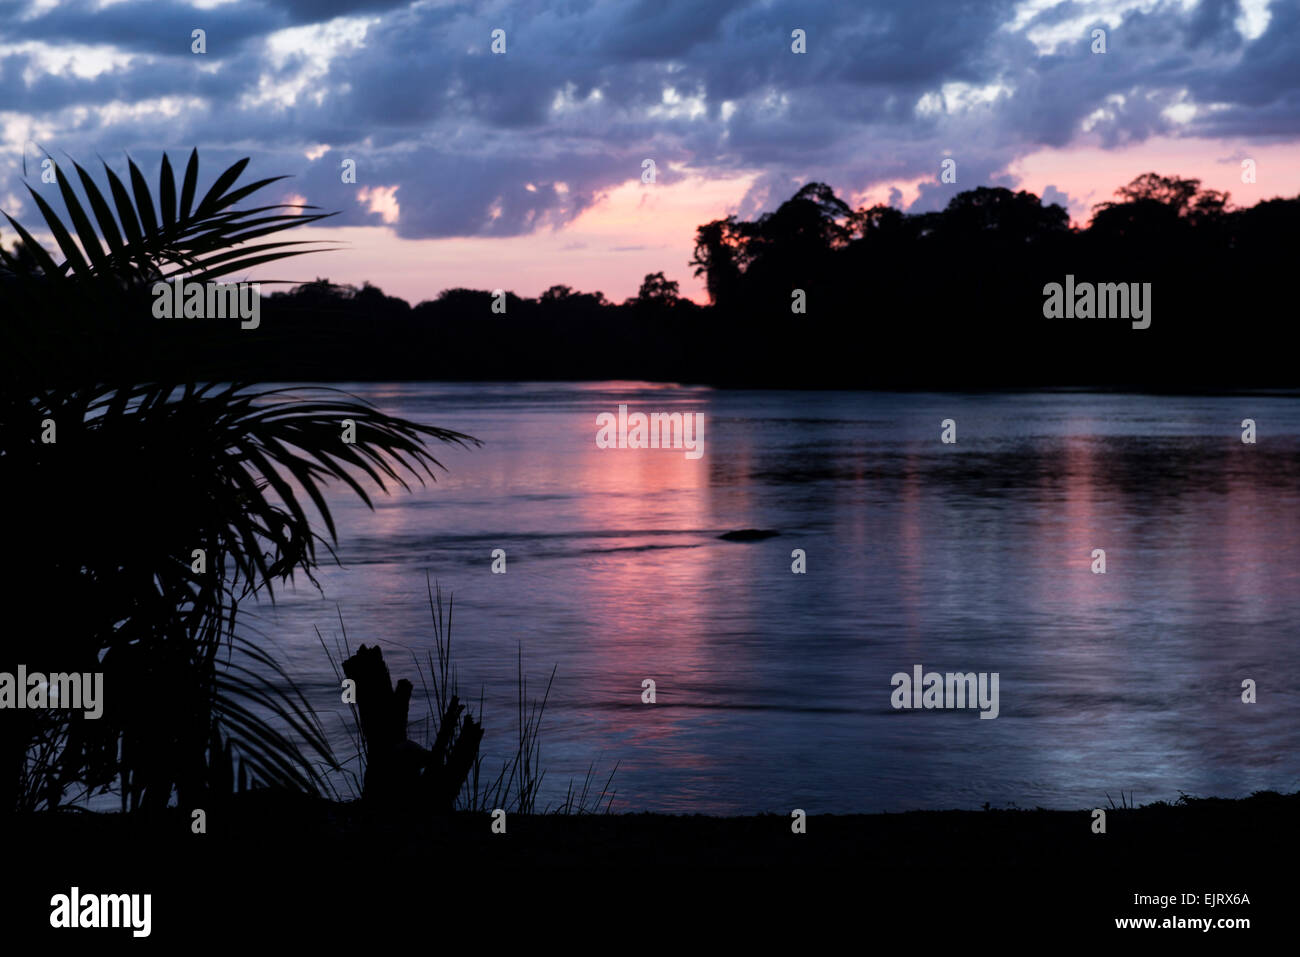 The Upper Suriname River at sunset, Suriname Stock Photo